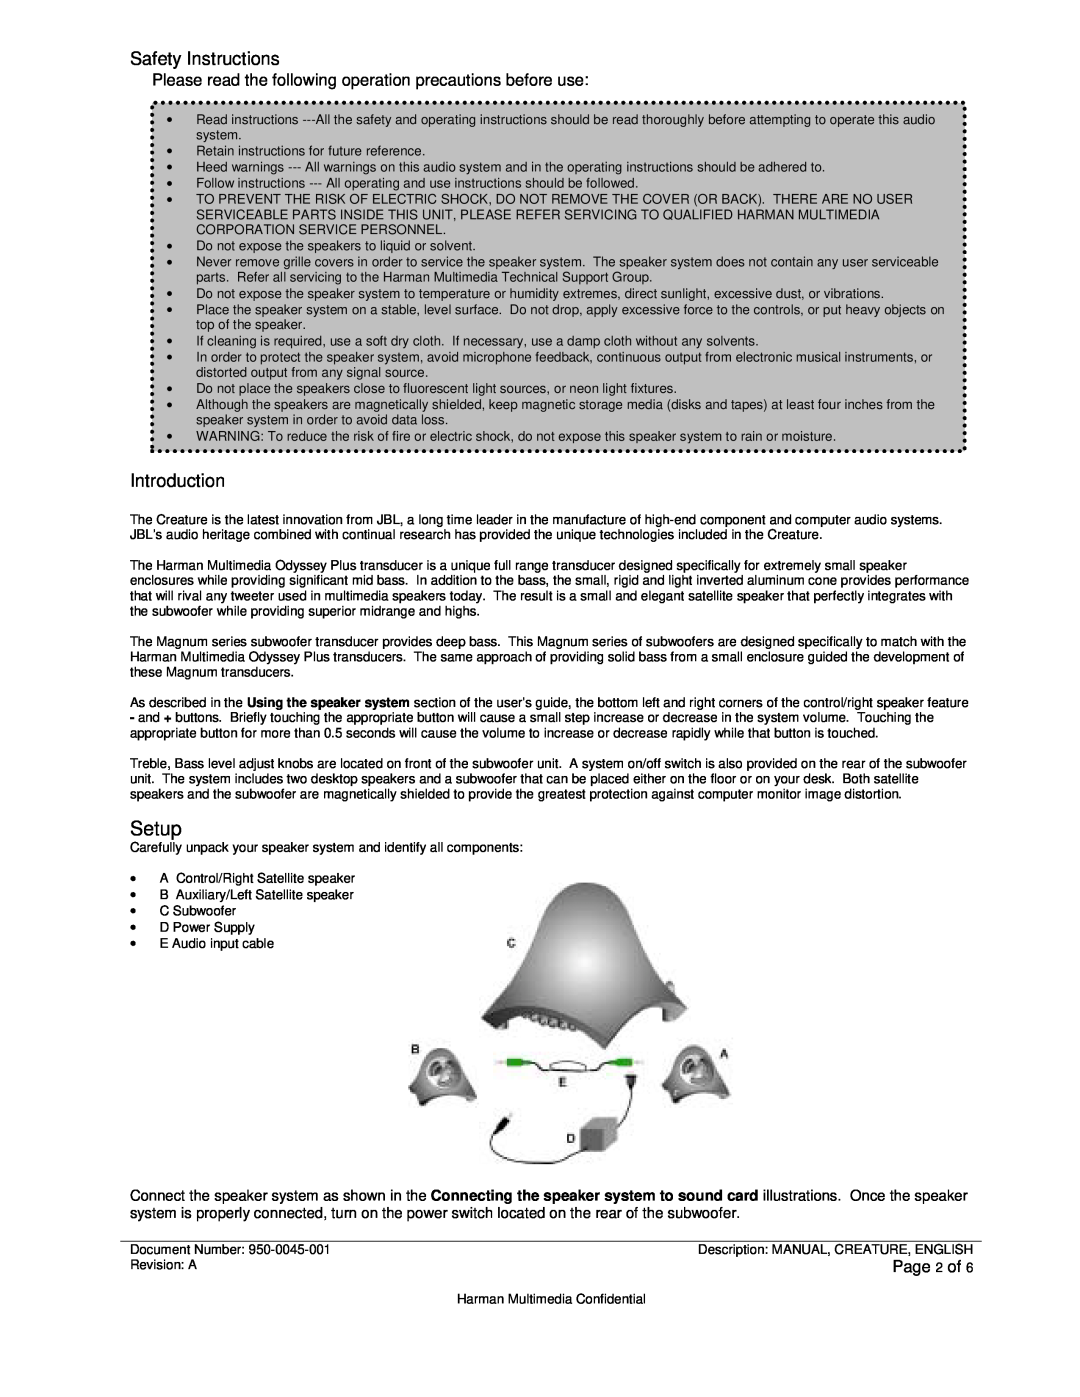 JBL CREATURE SELF POWERED SATELLITE SPEAKERS AND SUBWOOFER manual Setup, Page 2 of, Safety Instructions, Introduction 